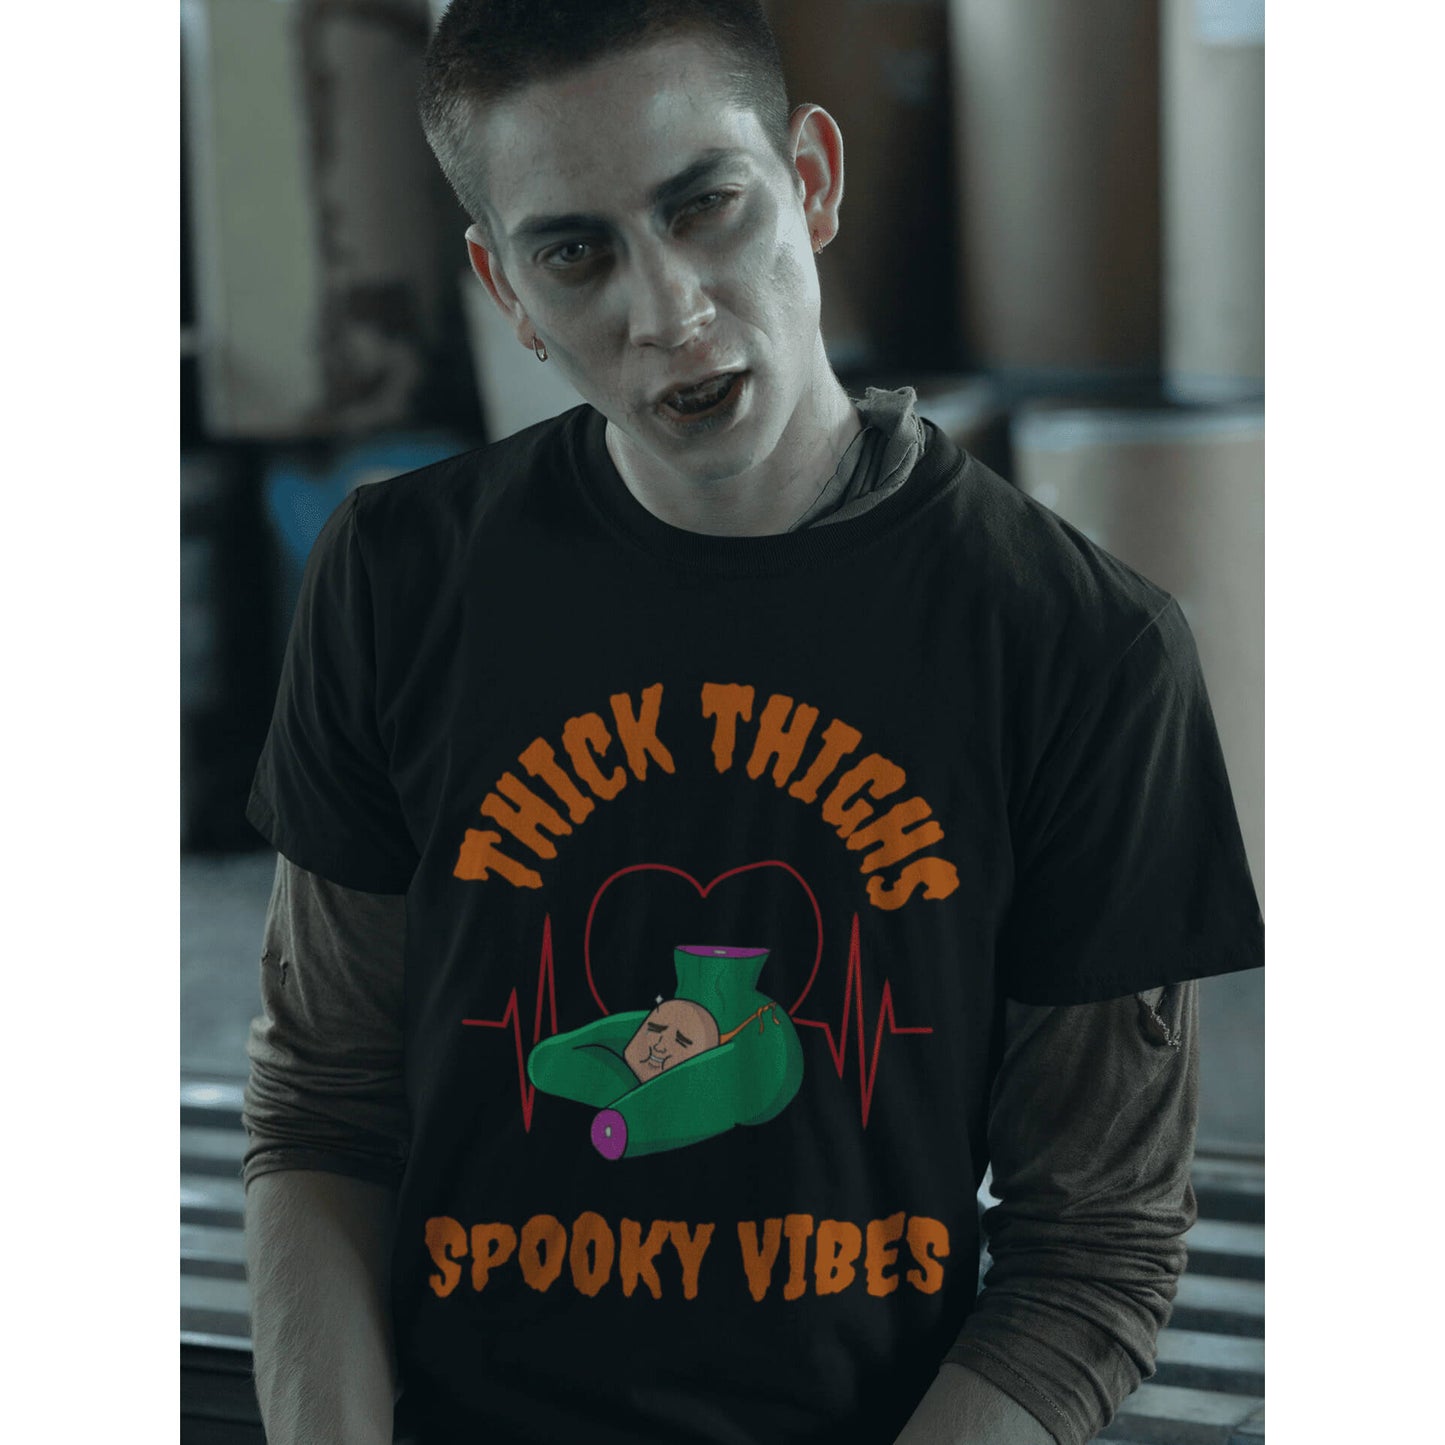 Thick Thighs Spooky Vibes Unisex T-shirt